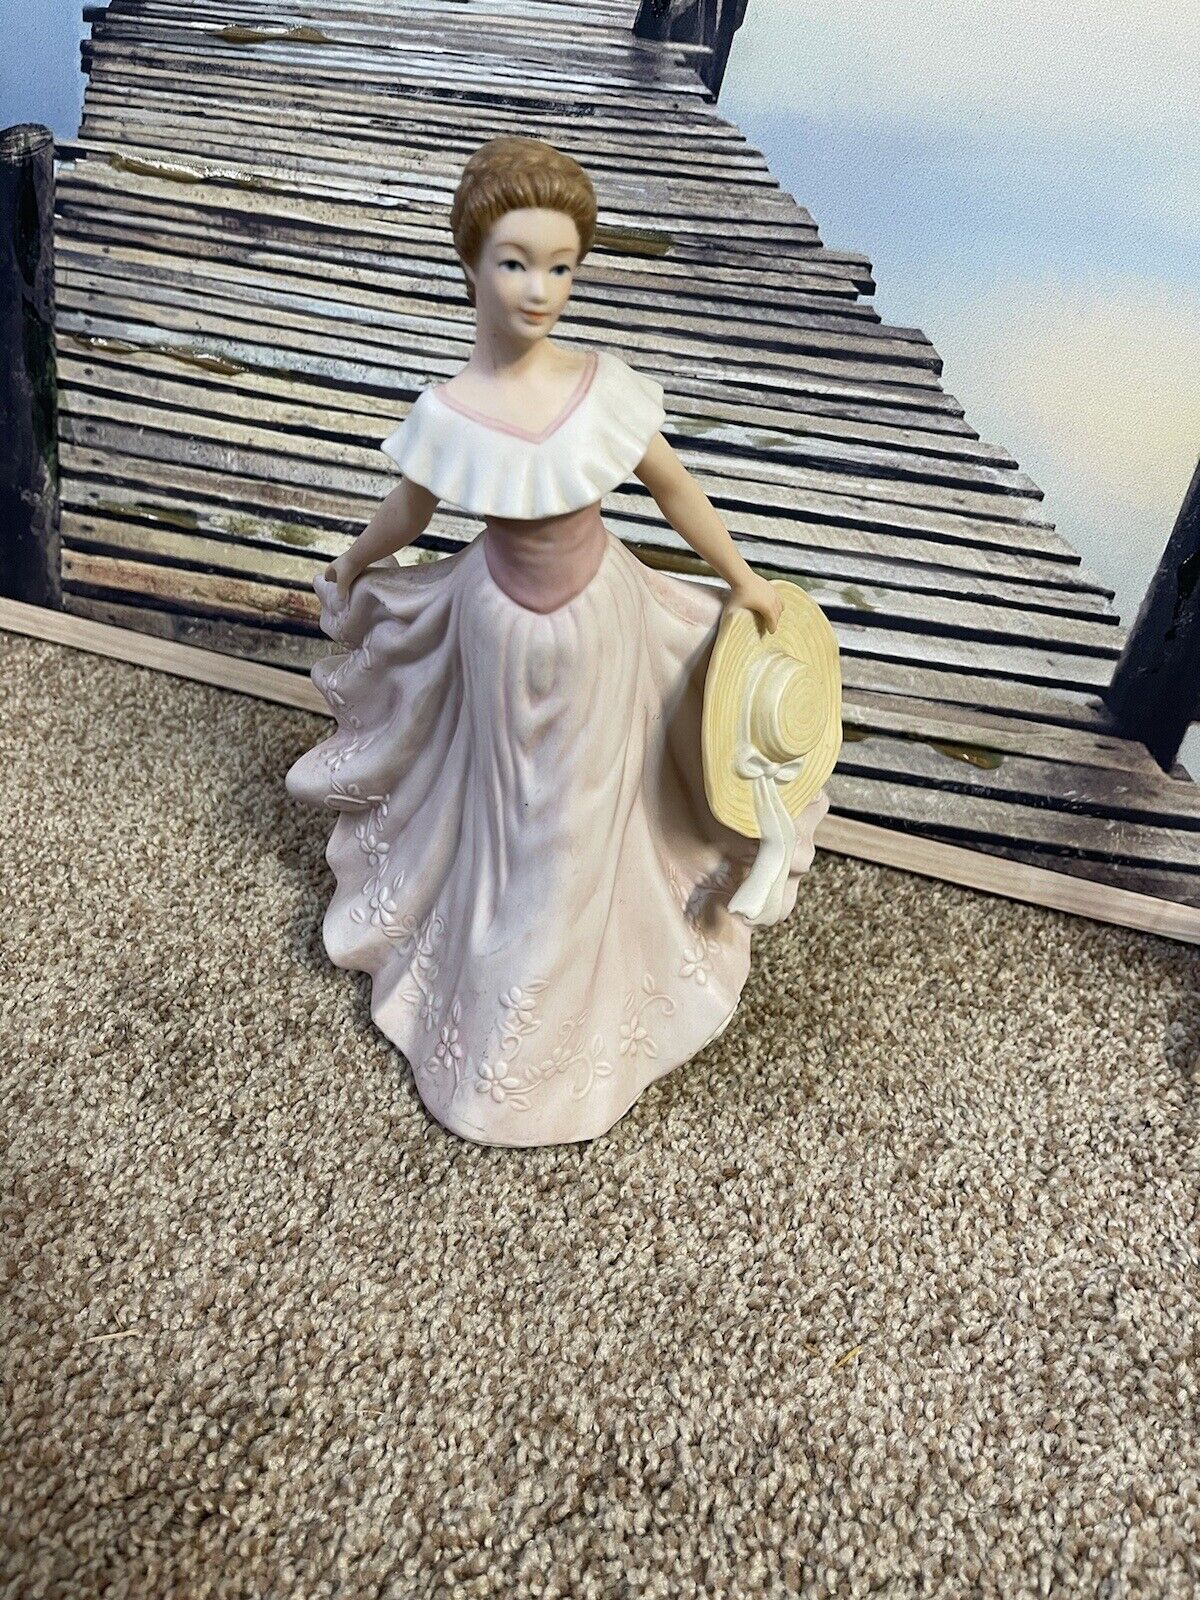 GRACE #11293-01 Masterpiece Porcelain Figurine made for Home Interiors and Gifts